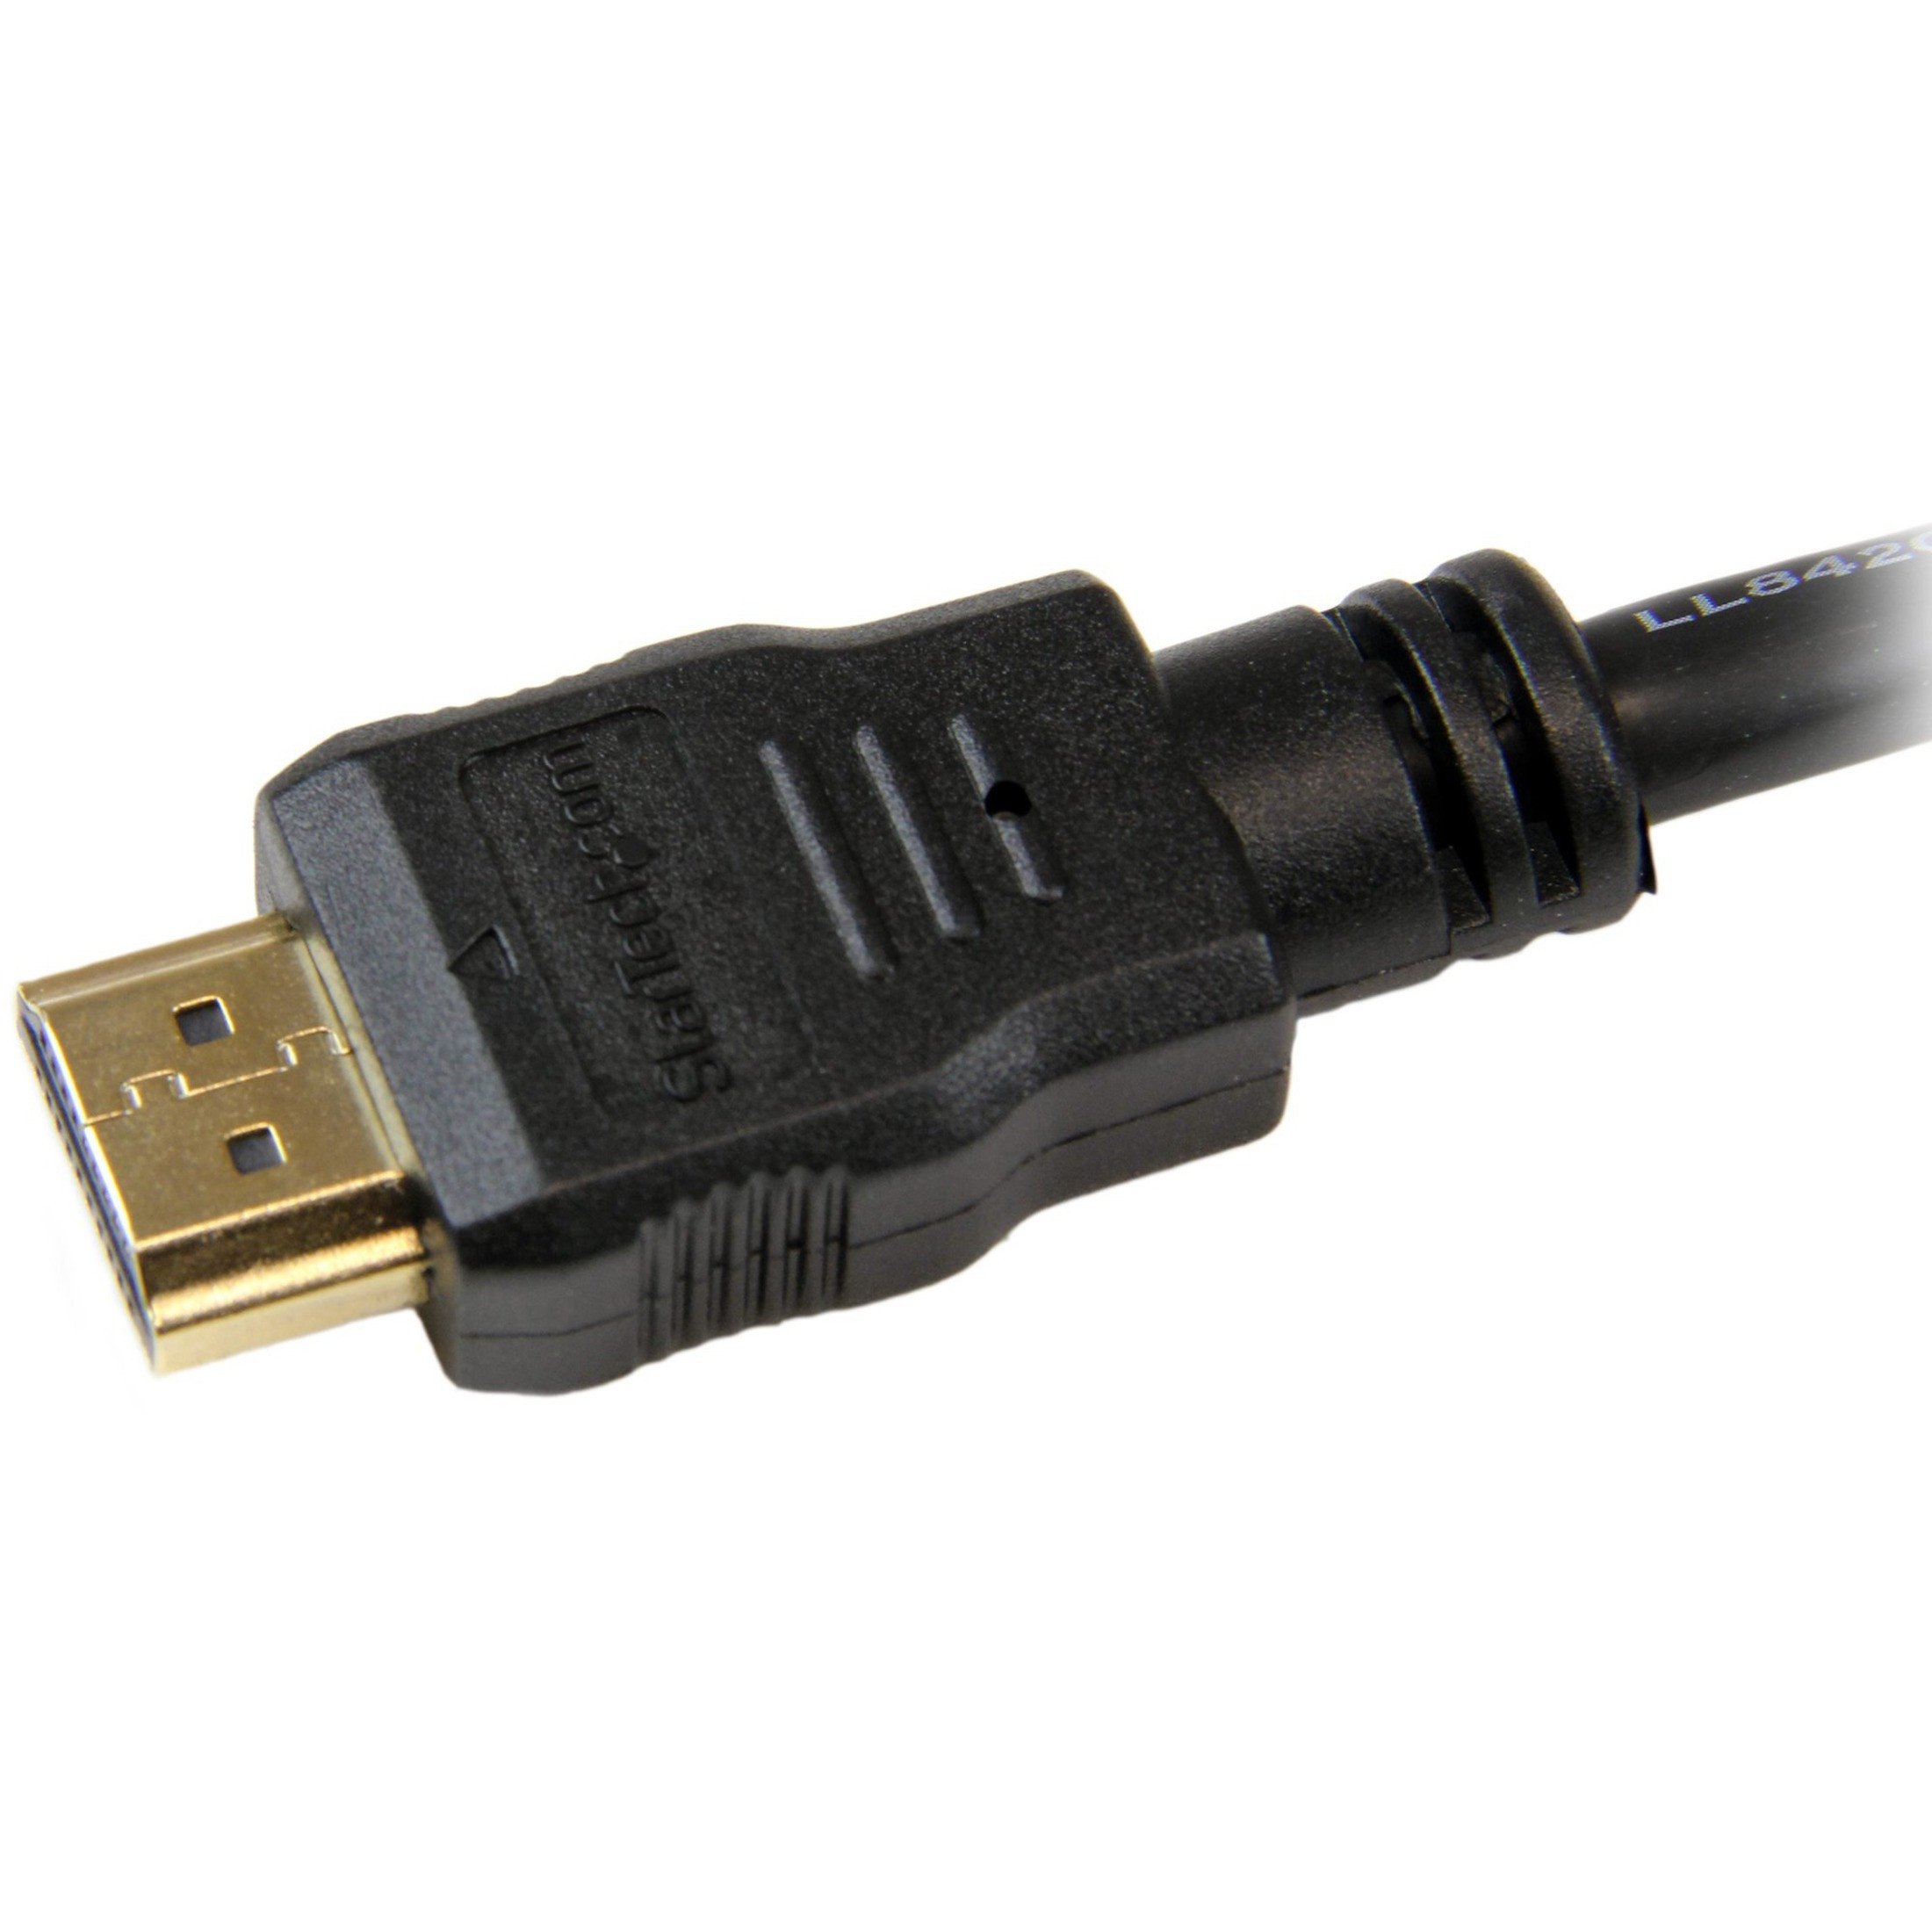 10ft 4K High Speed HDMI Cable - HDMI 1.4 - HDMI® Cables & HDMI Adapters